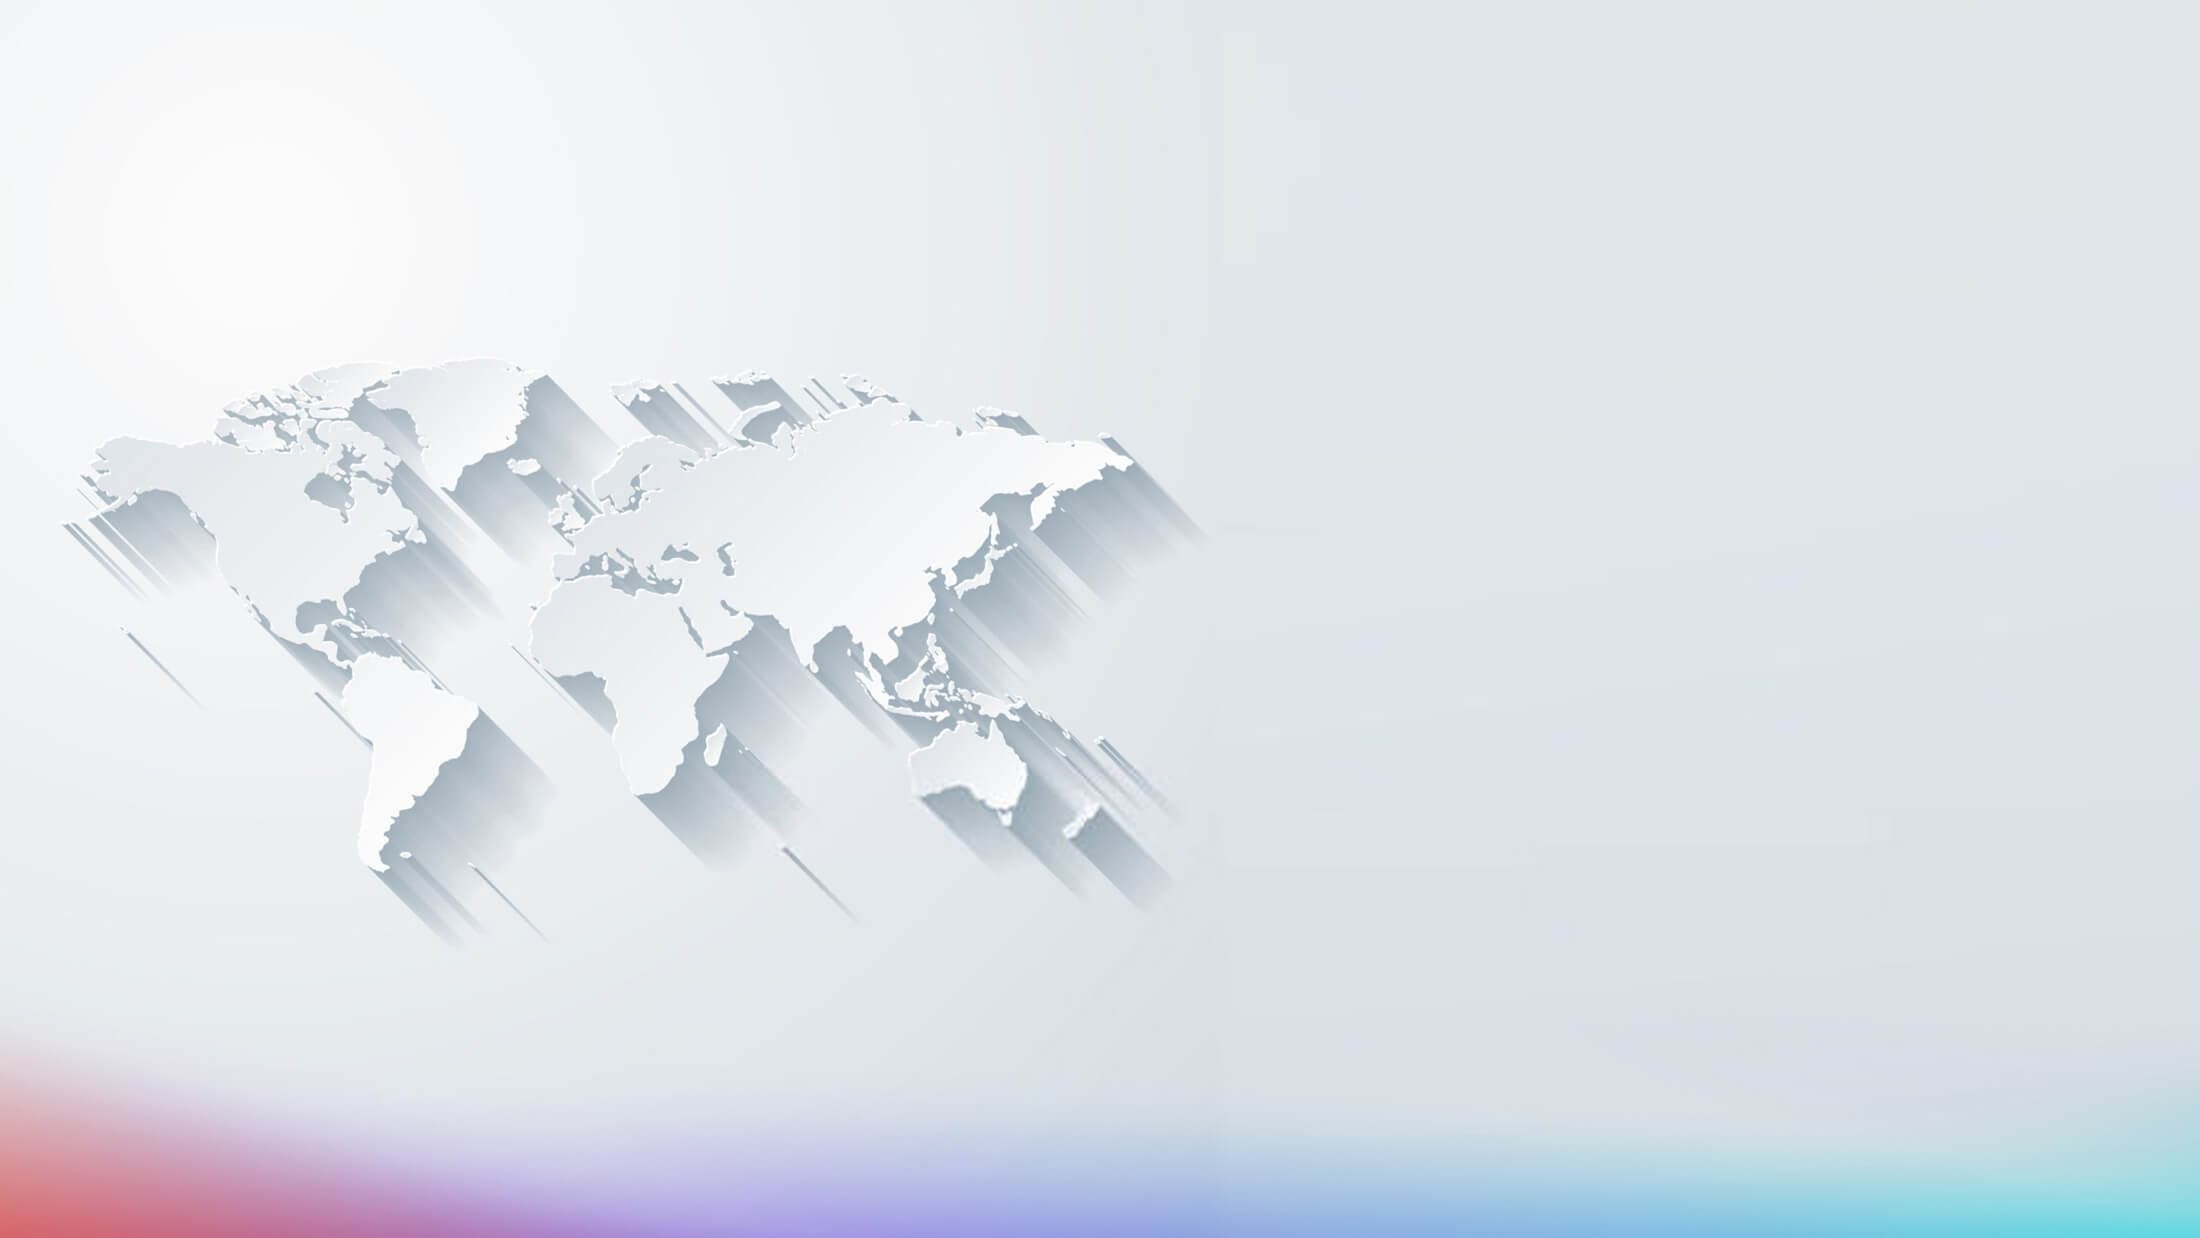 A stylized world map displayed over a colorful gradient.